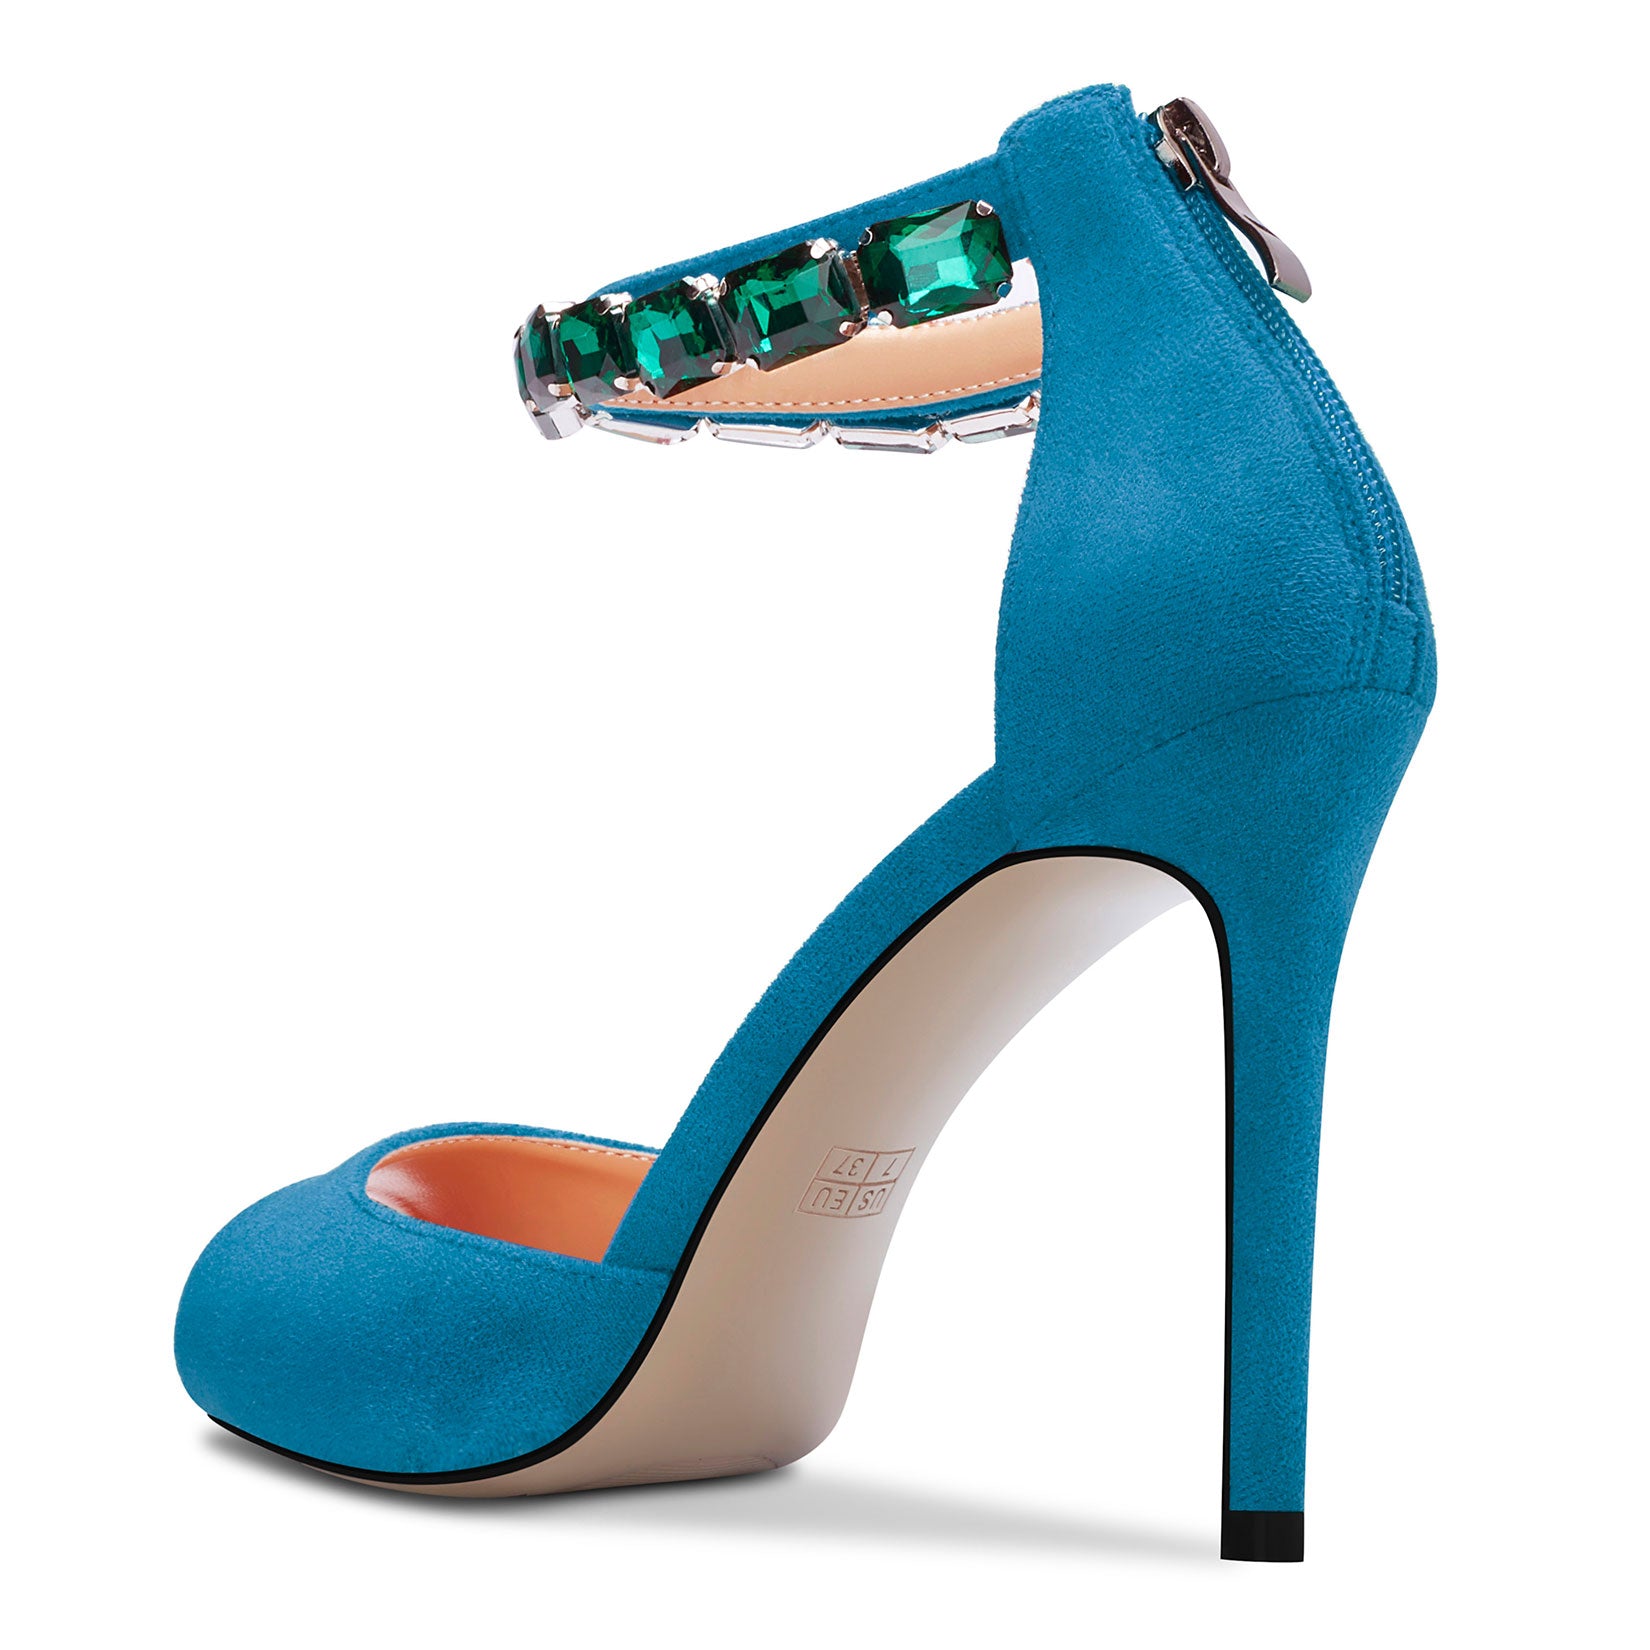 Ladies High Heels Stiletto Pumps Ankle-Strap with Gemstone Peep-toe Sandals Suede 4 Inches Heel